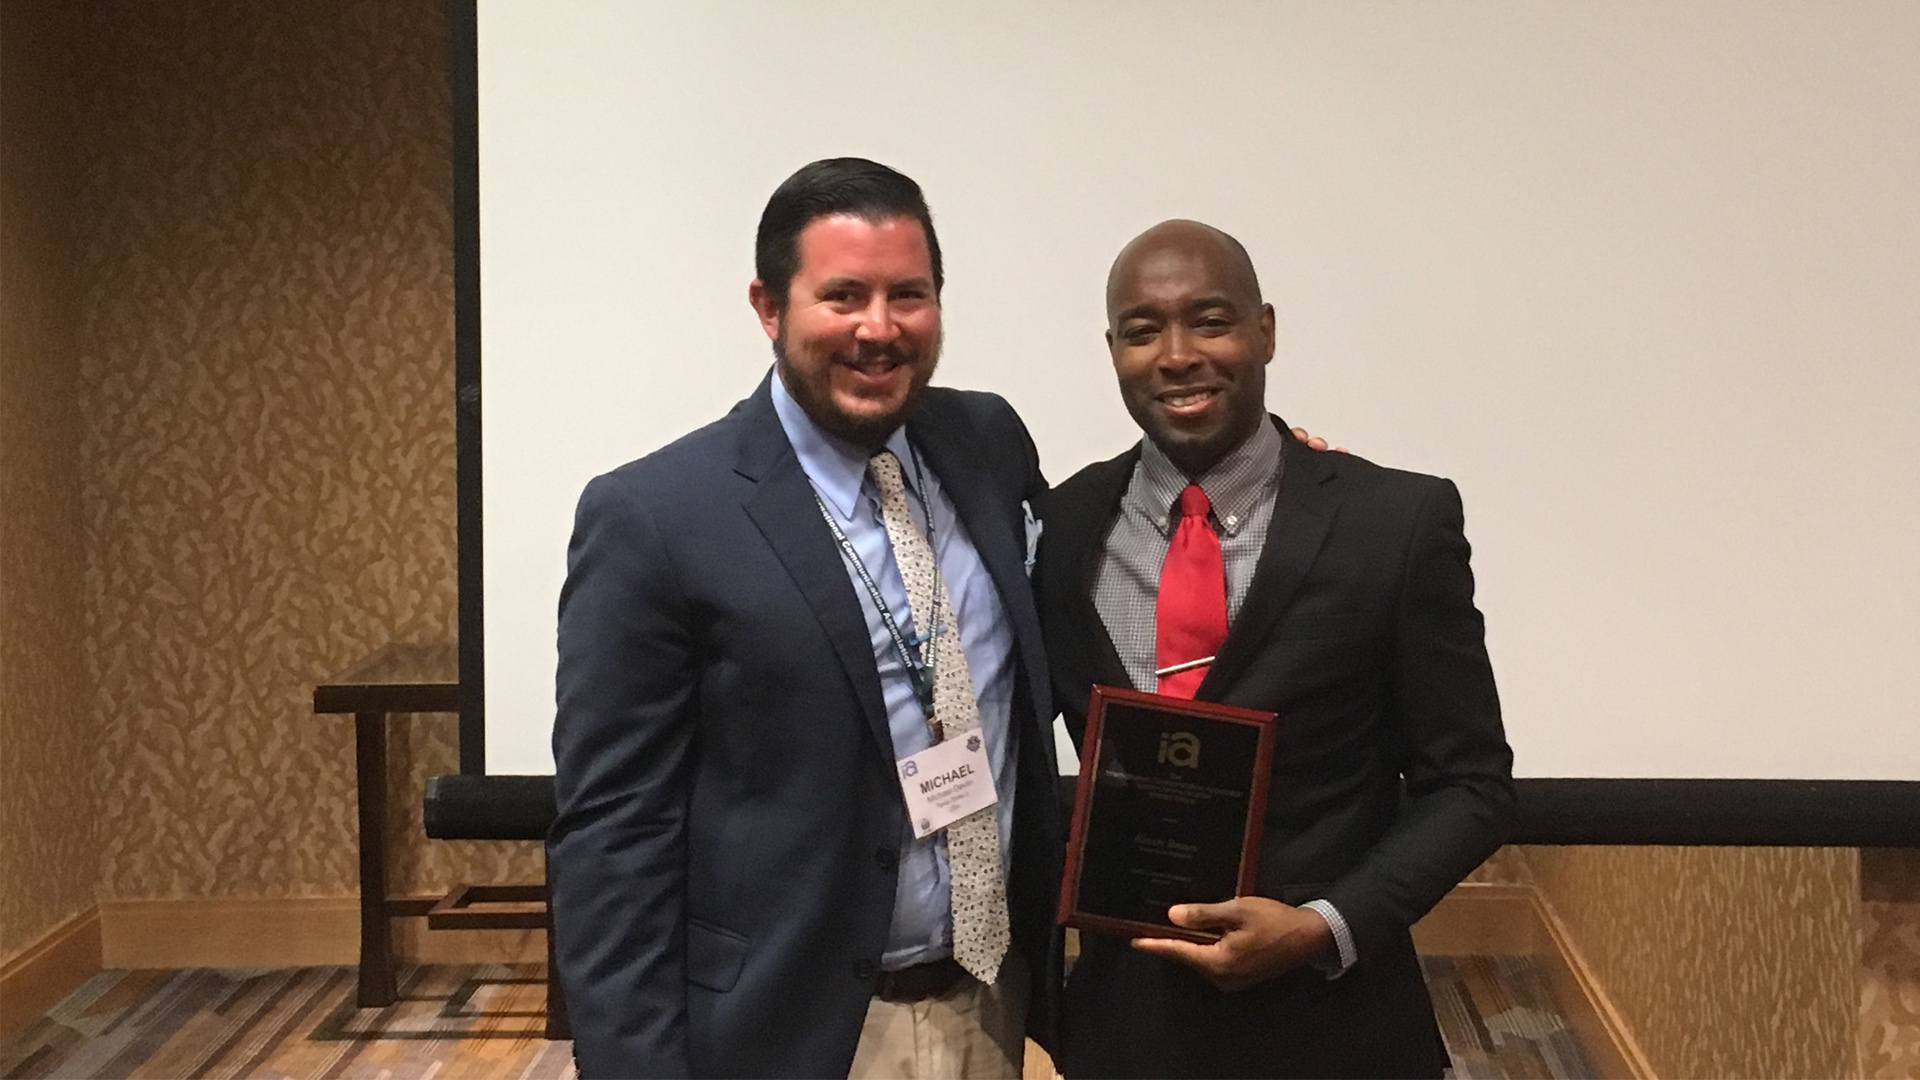 UA’s Brown Receives Early Career Research Award